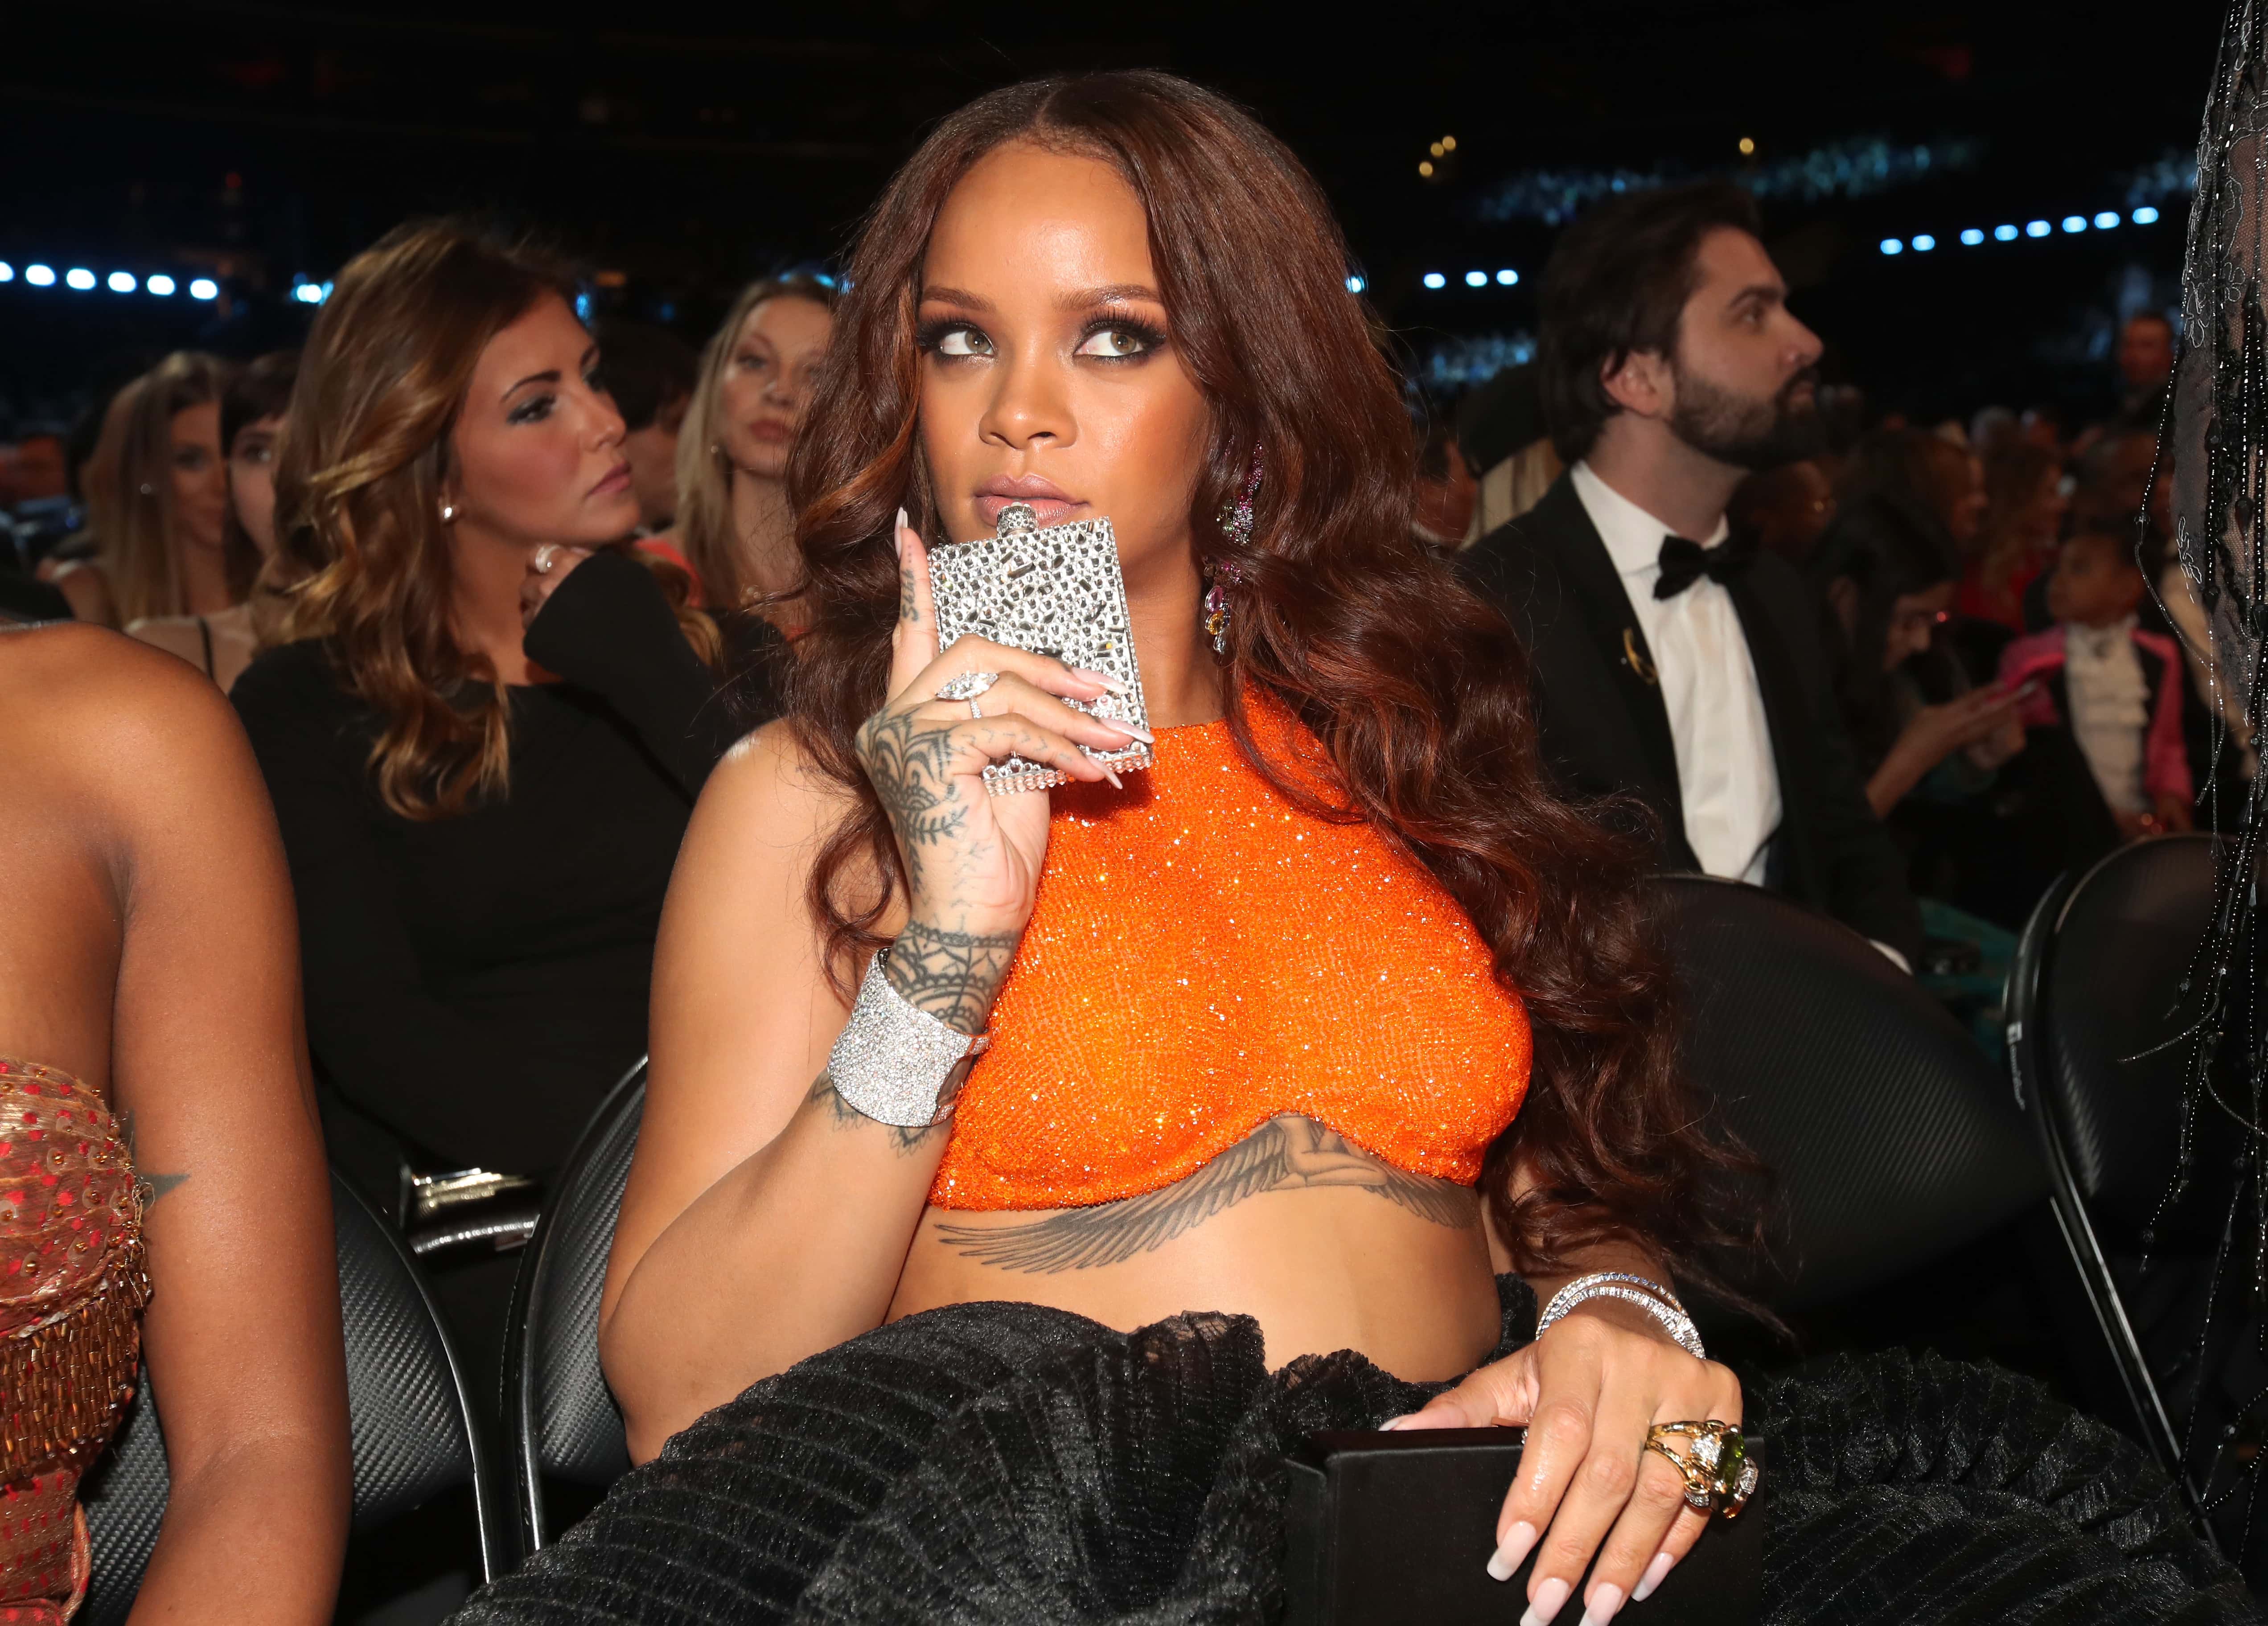 45 Fabulous Facts About Rihanna - The Fact Site